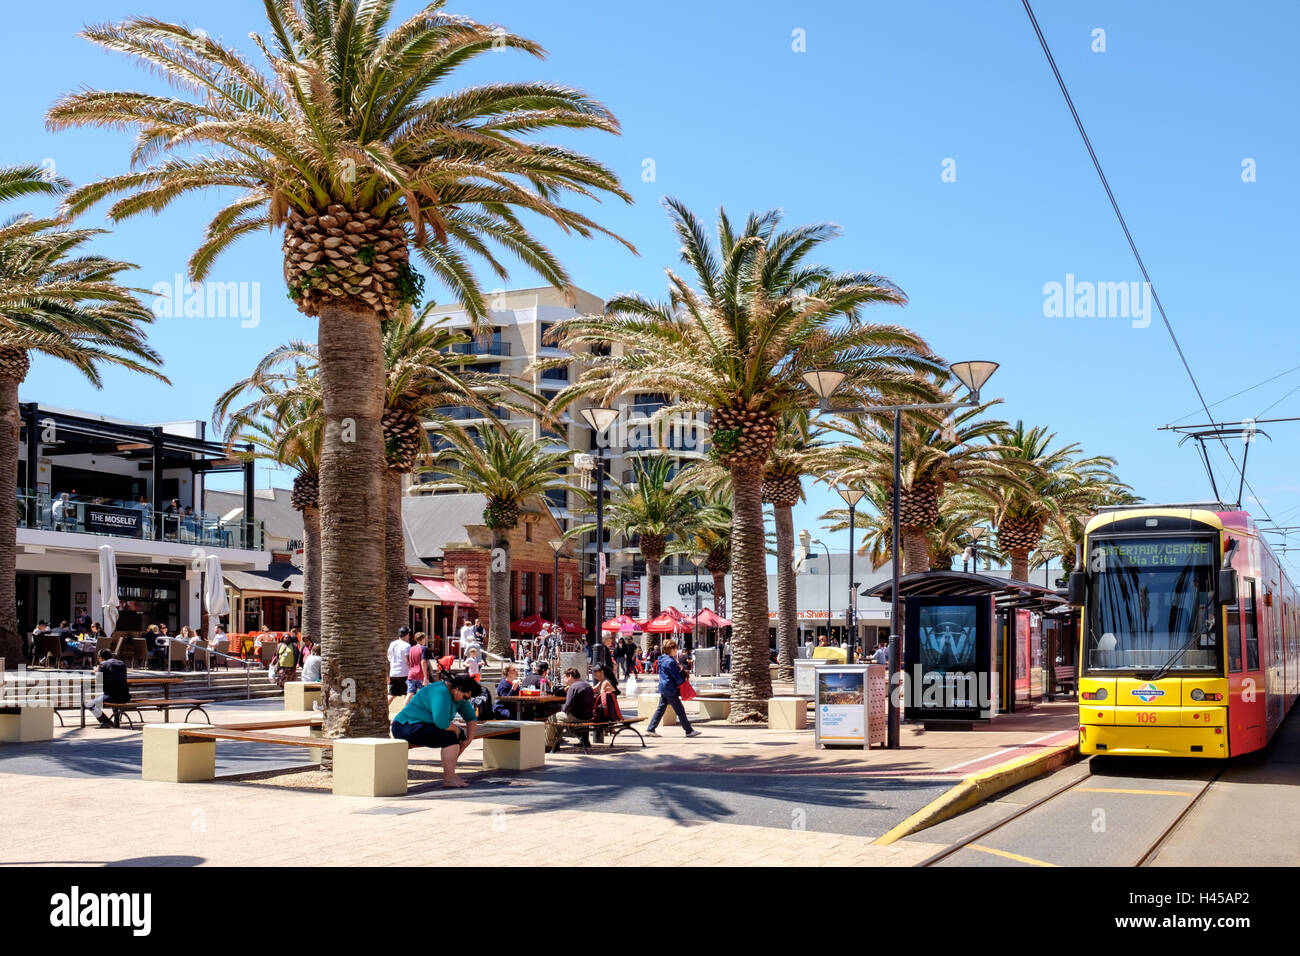 The tram at 'Moseley Square' Glenelg, South Australia's most popular seaside entertainment area. Stock Photo